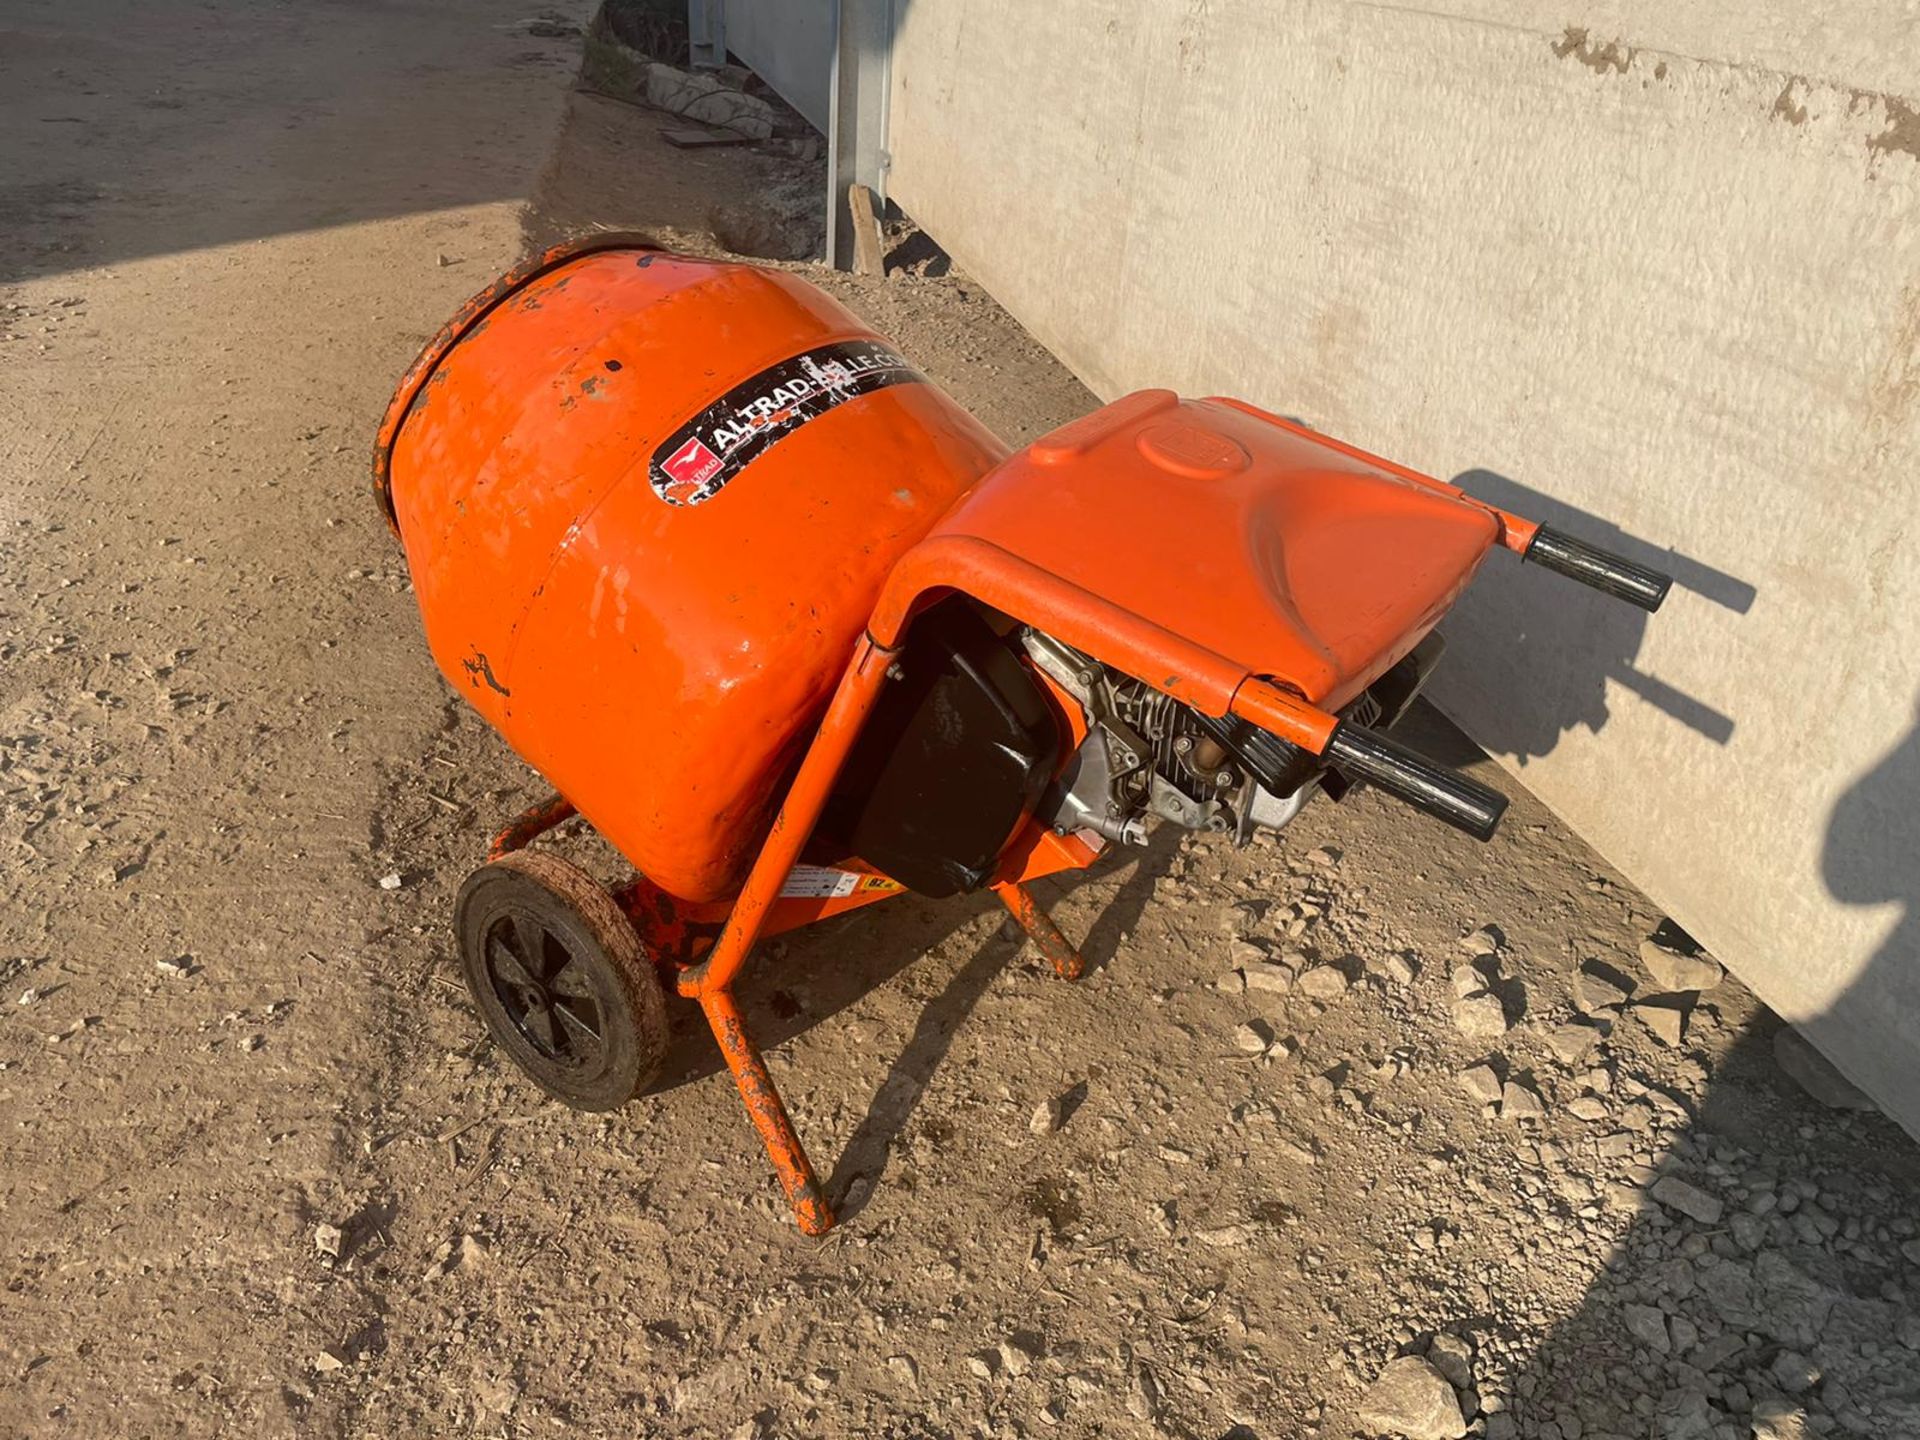 2019 BELLE MINI MIX 150 PETROL CEMENT MIXER, HONDA GX120 ENGINE, RUNS AND WORKS, GOOD COMPRESSION - Image 3 of 7